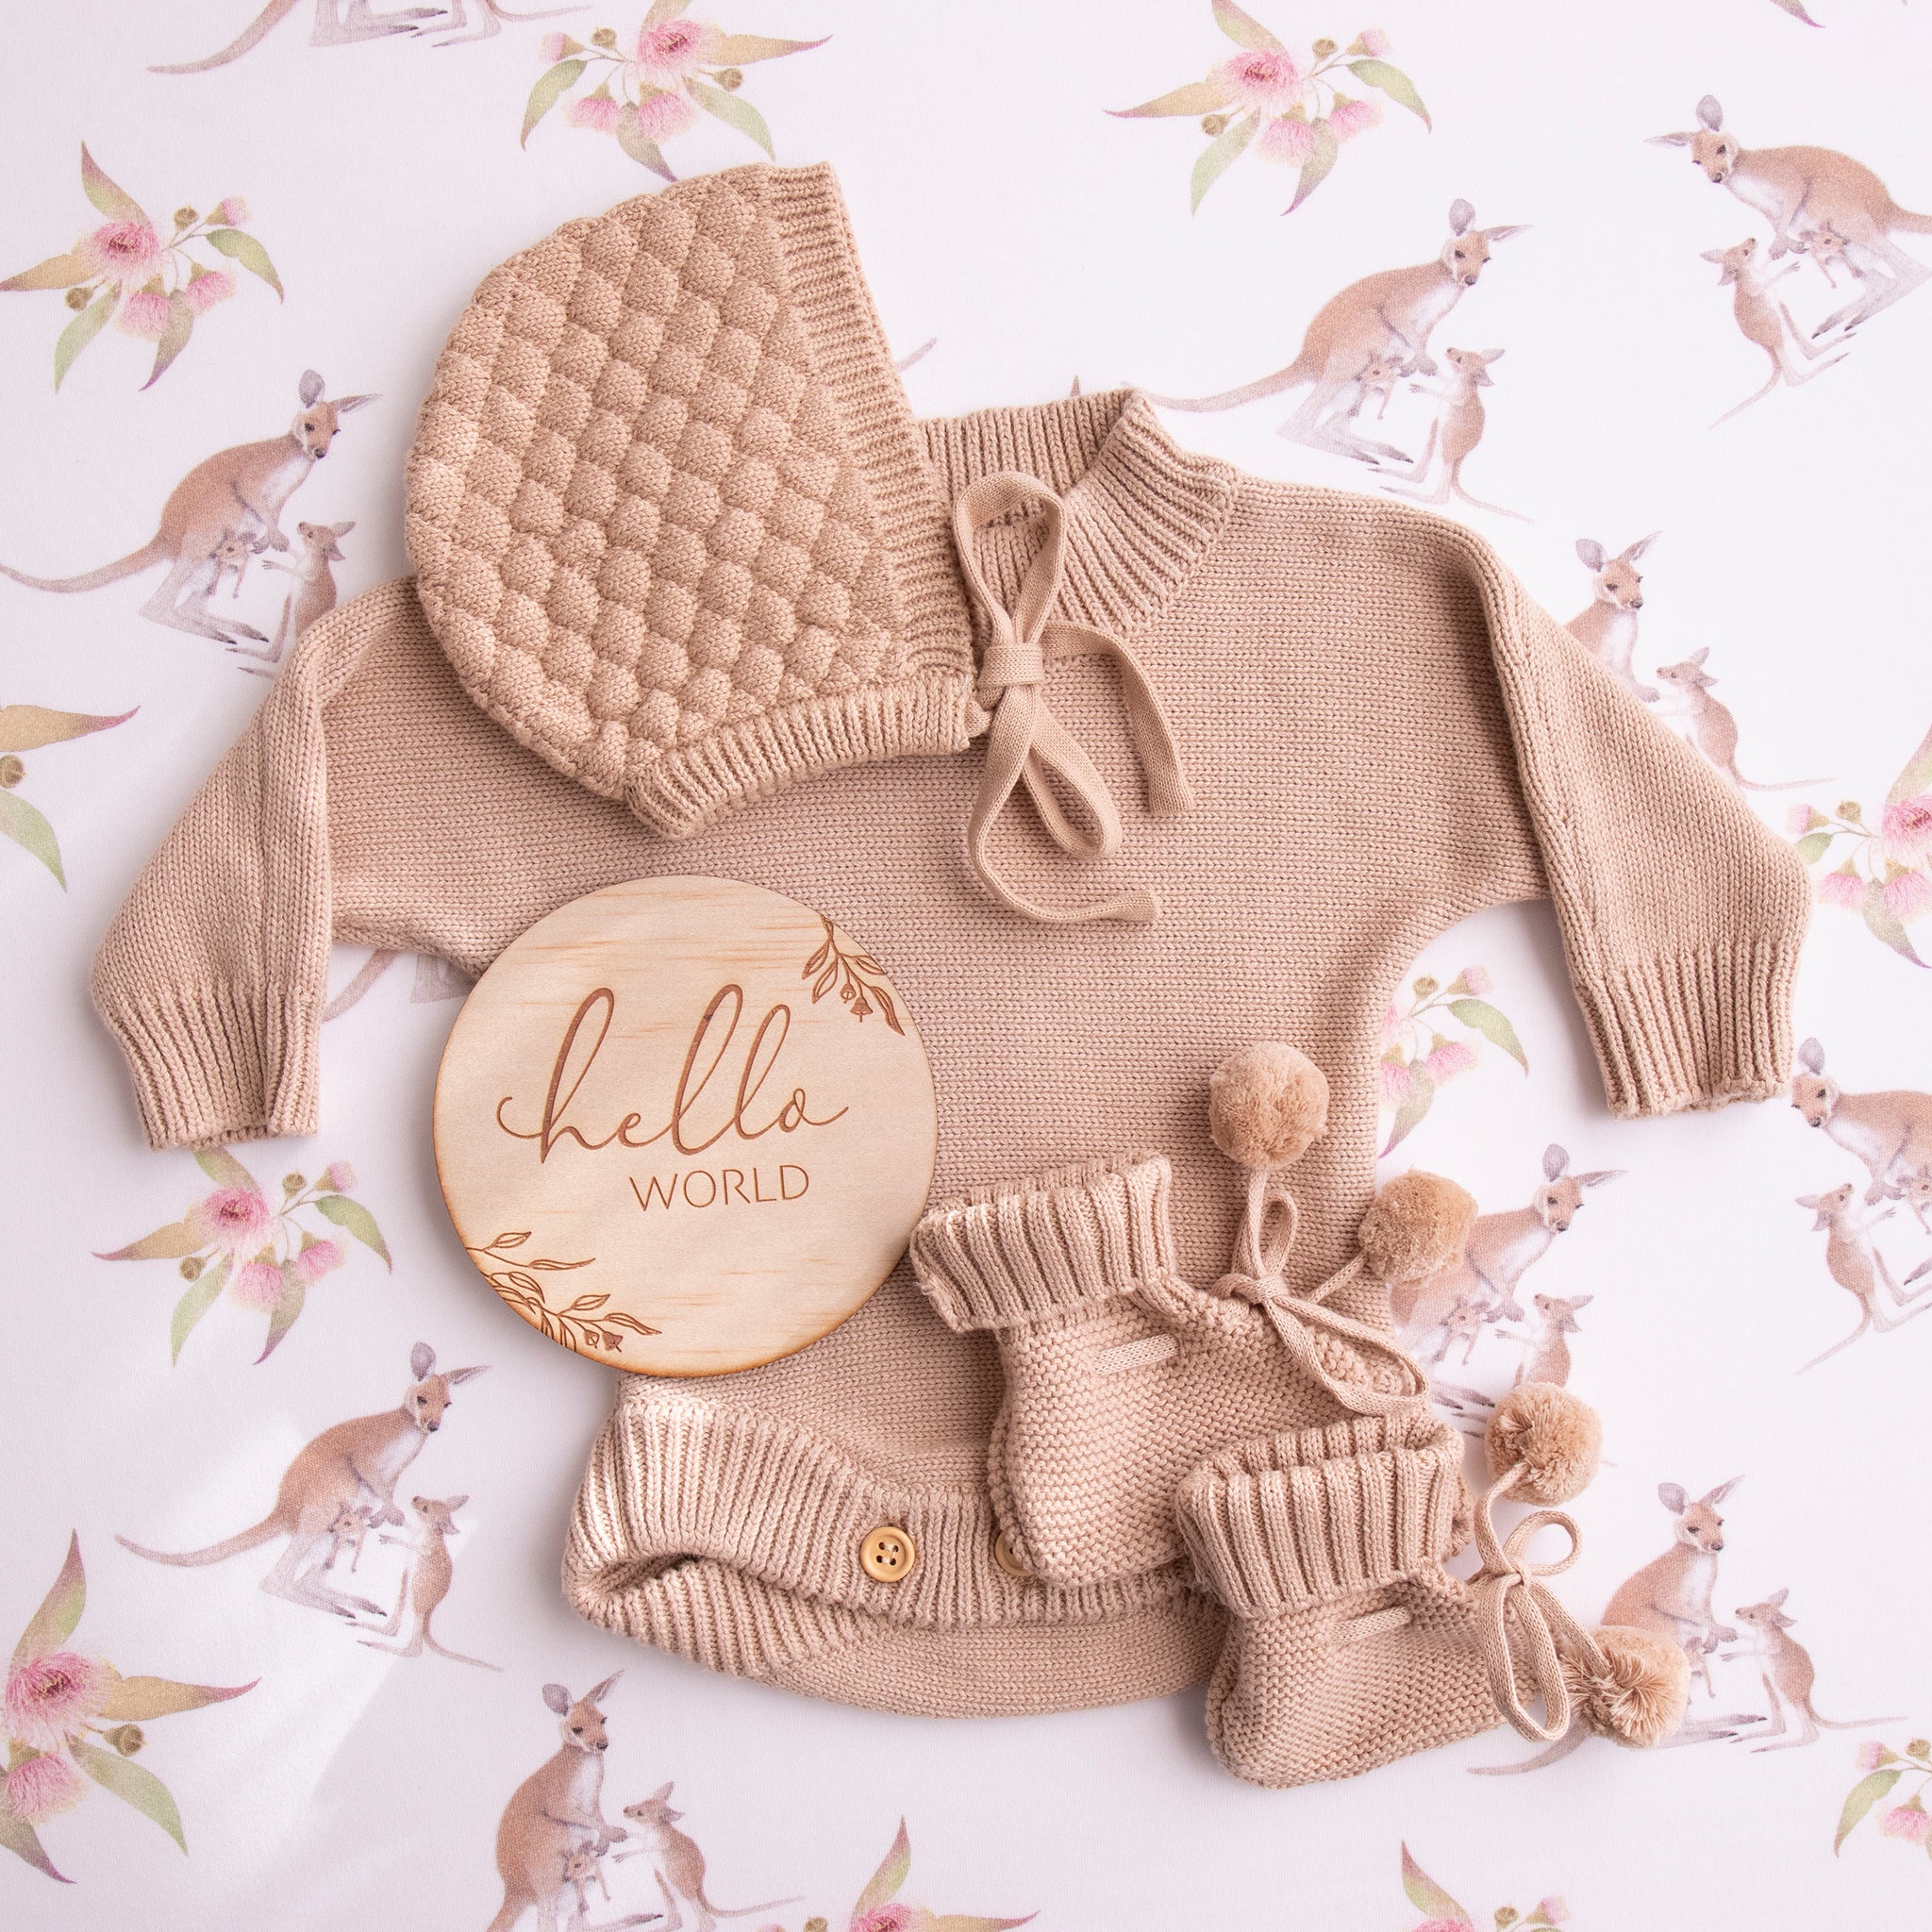 caramel-romper with pom pom booties,bonnet and announcement disc for newborns 100 cotton knit